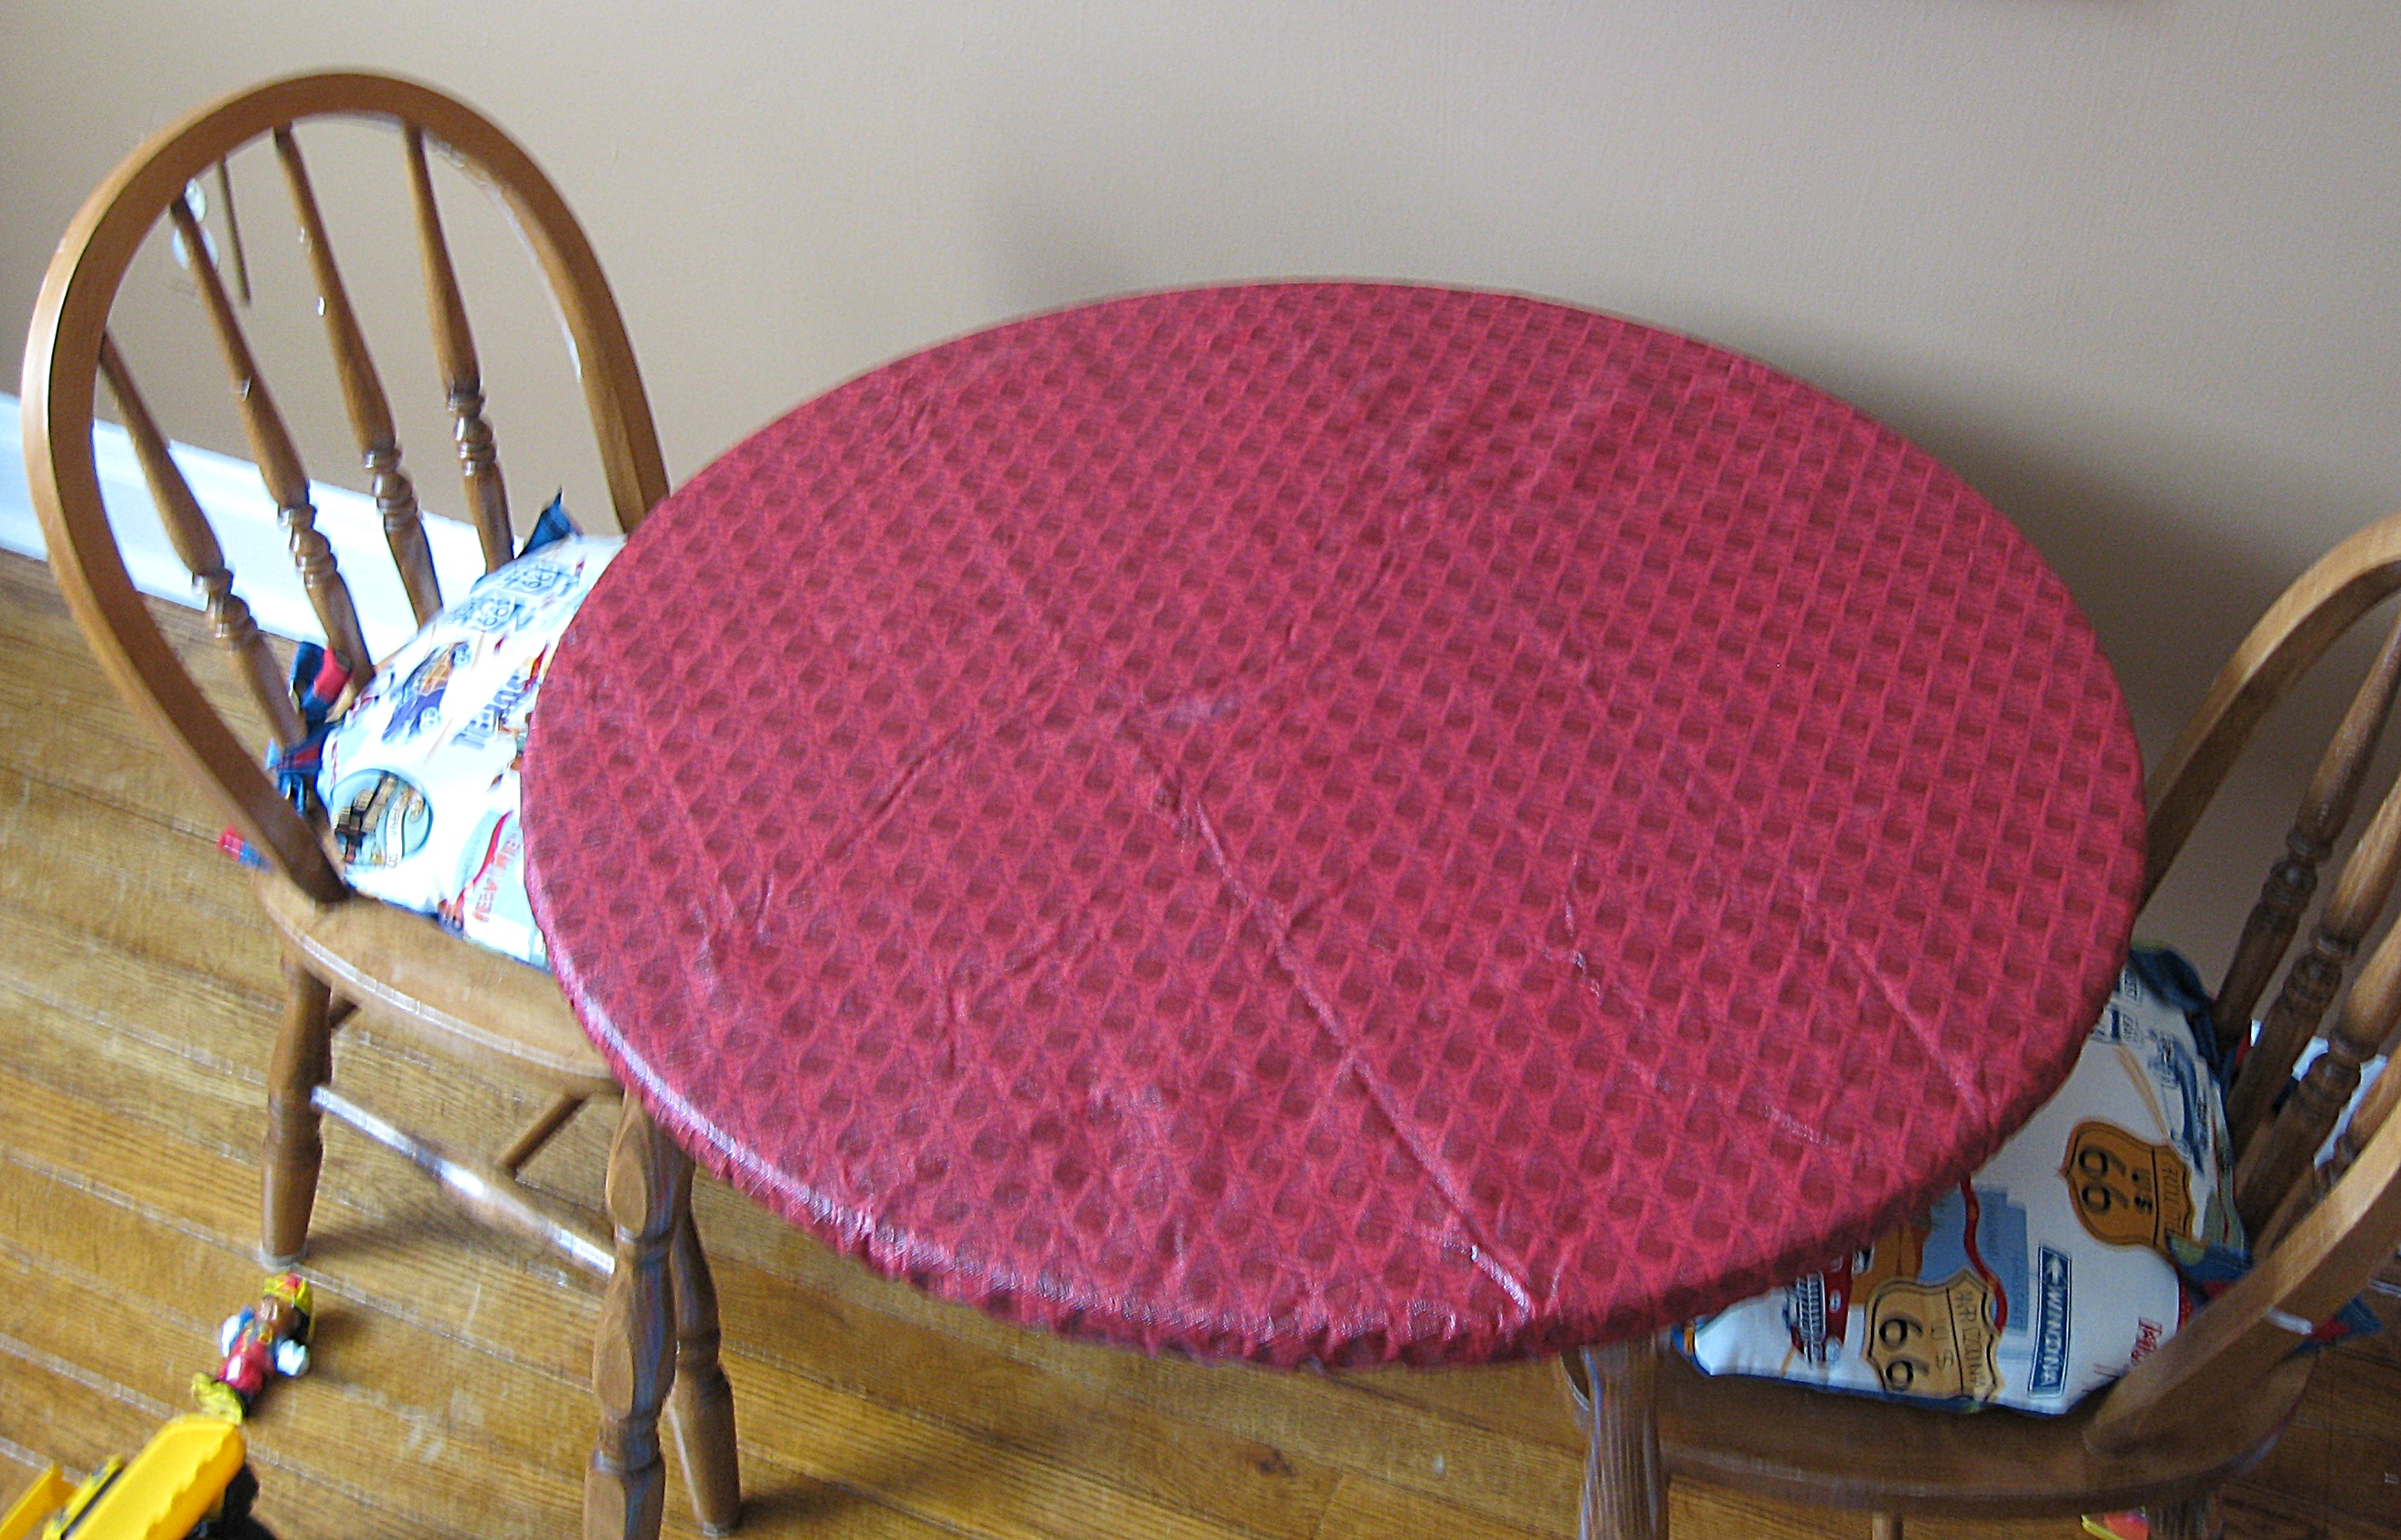 Making A Mess Proof Fitted Tablecloth, How To Make A Round Table Cover With Elastic